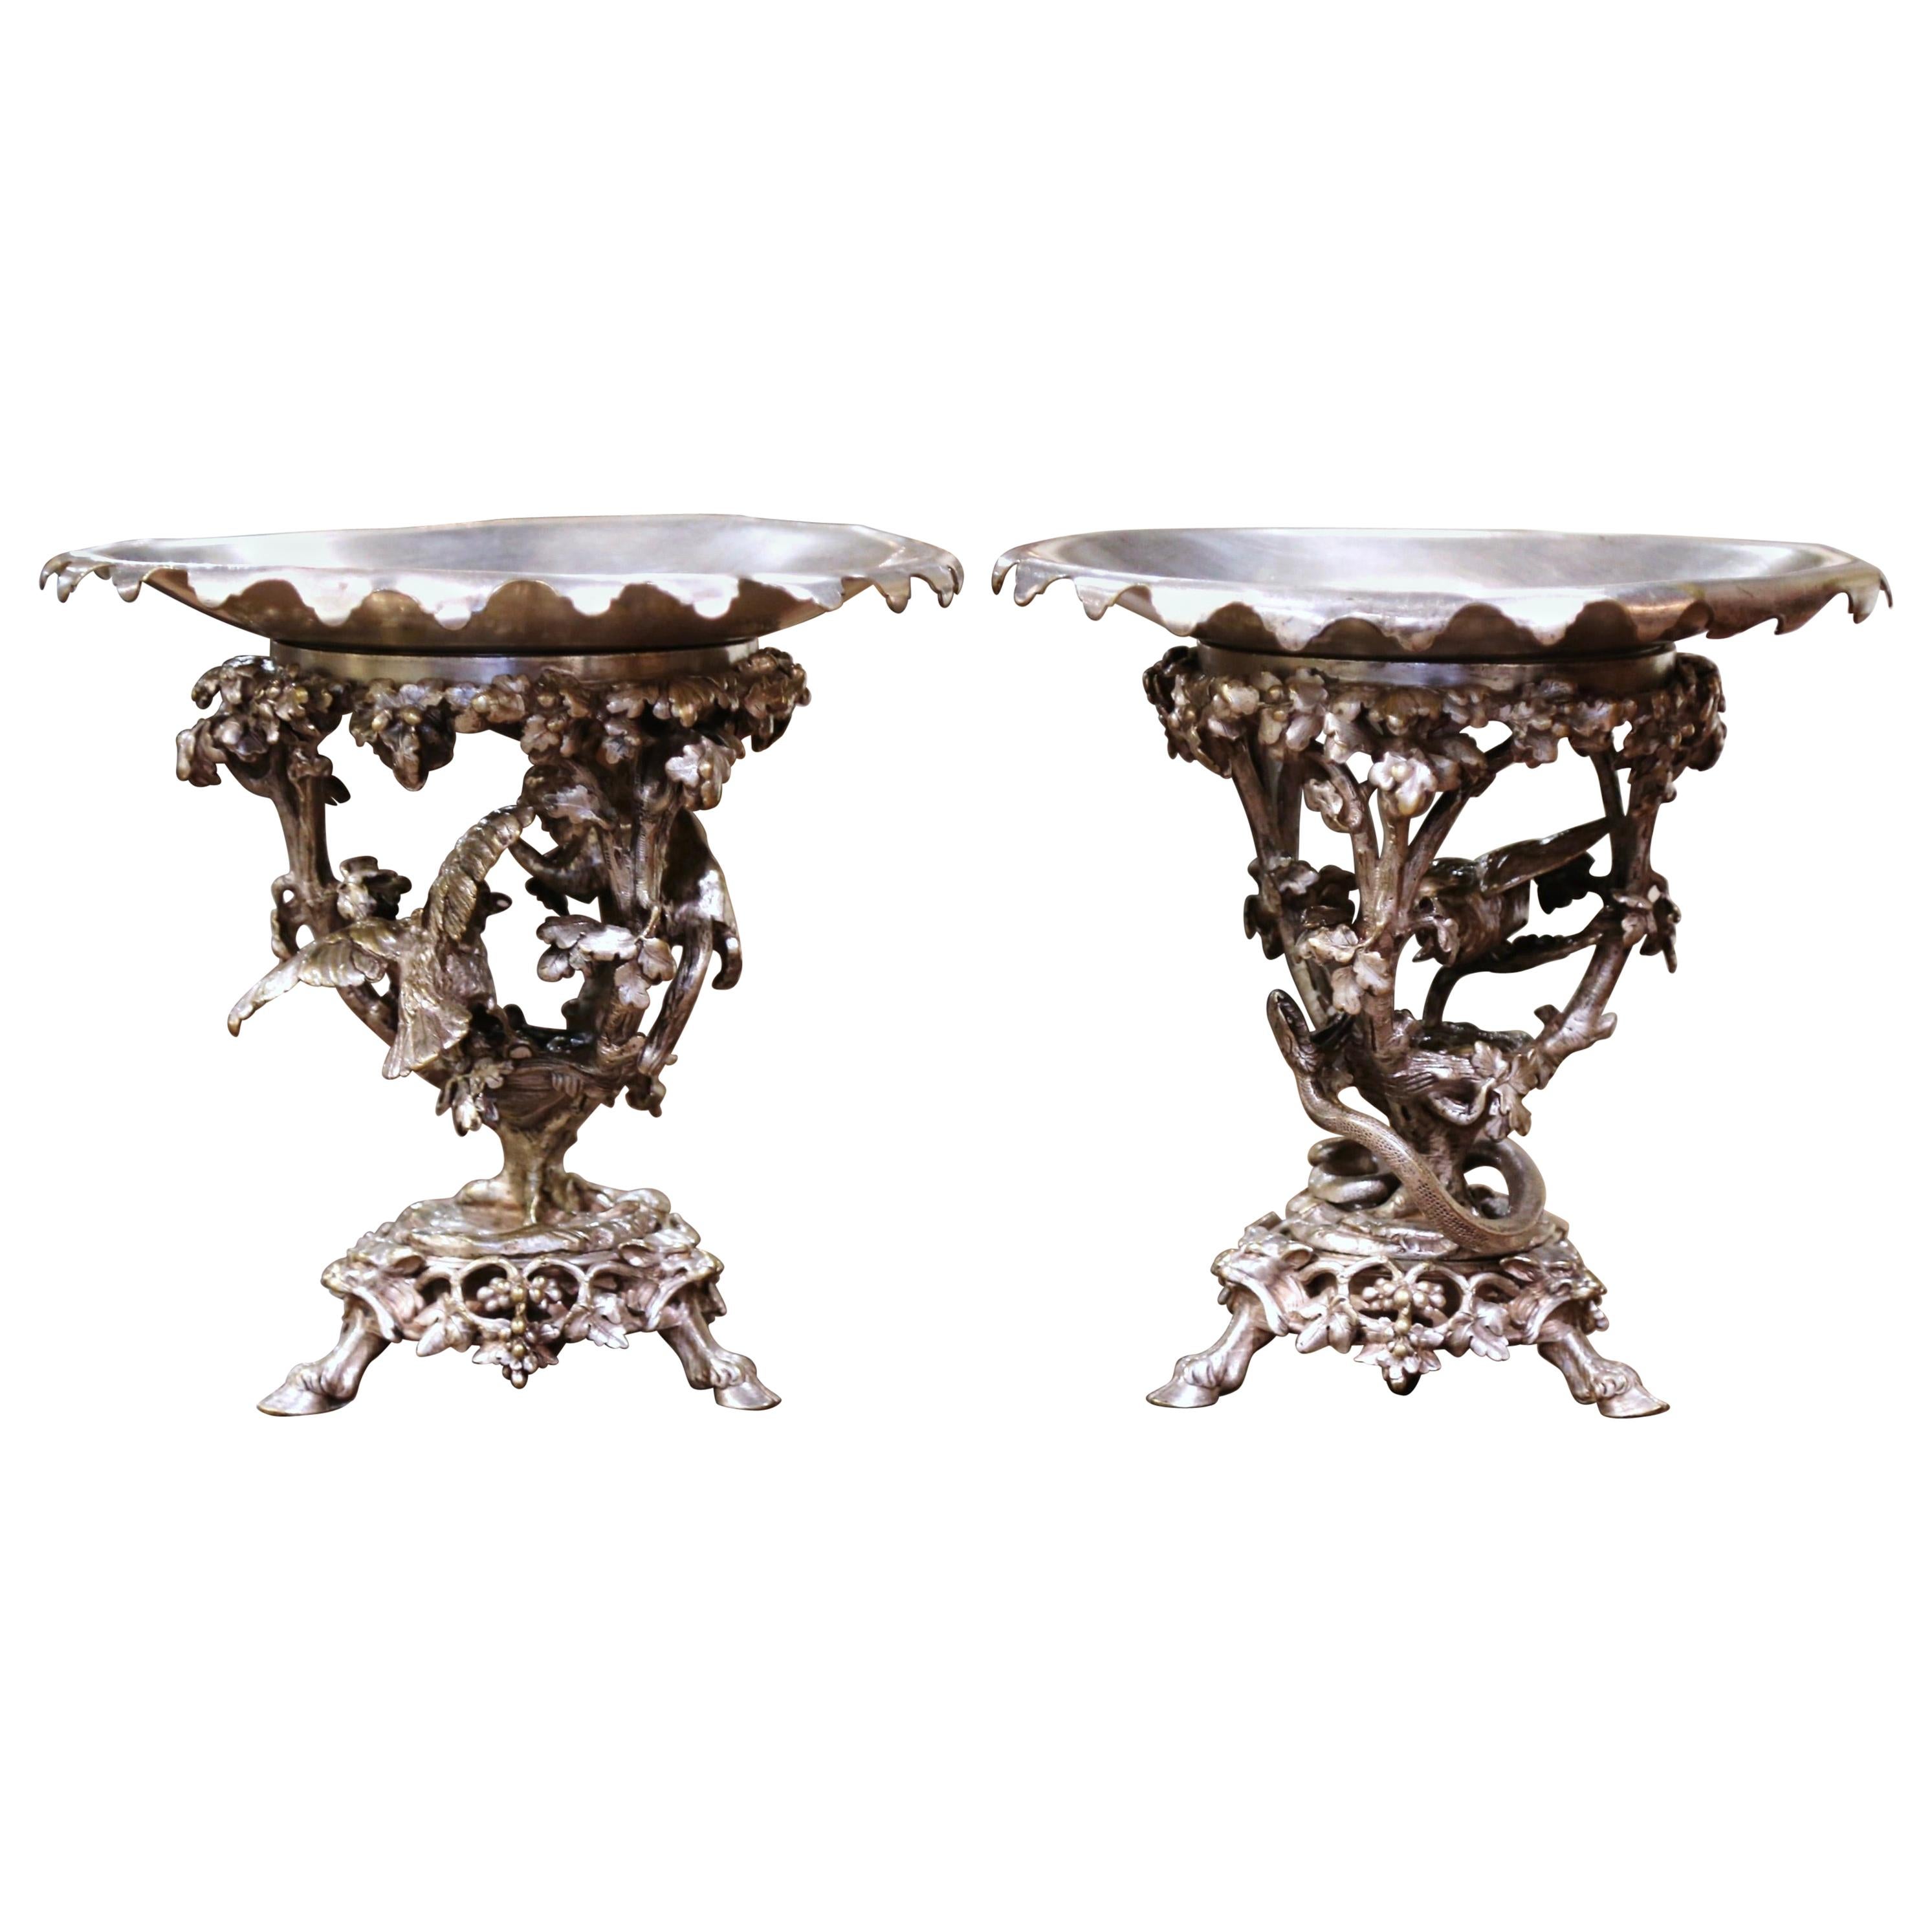 Pair of 19th Century French Silvered Bronze Compotes Signed Christofle